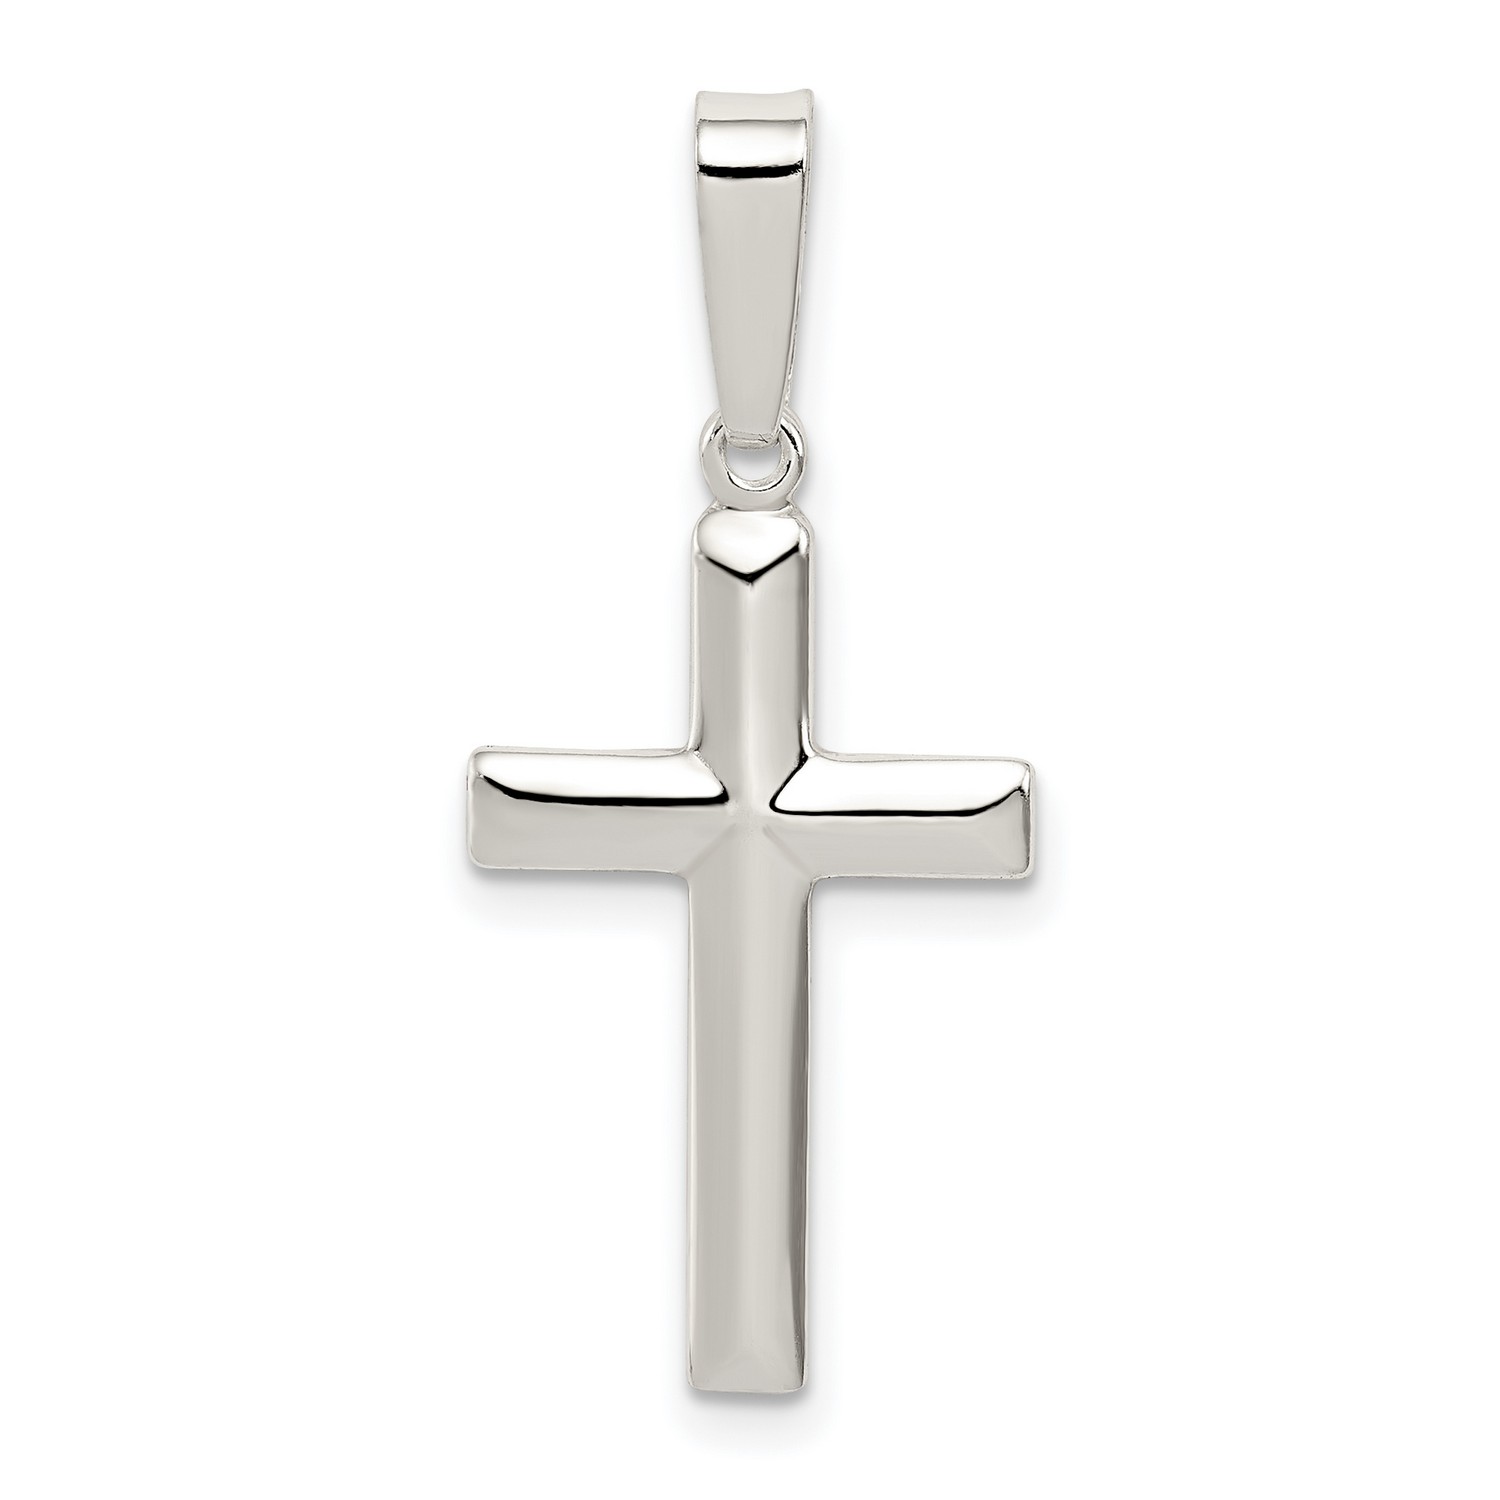 solid 925 sterling silver cross charm pendant 13*10mm